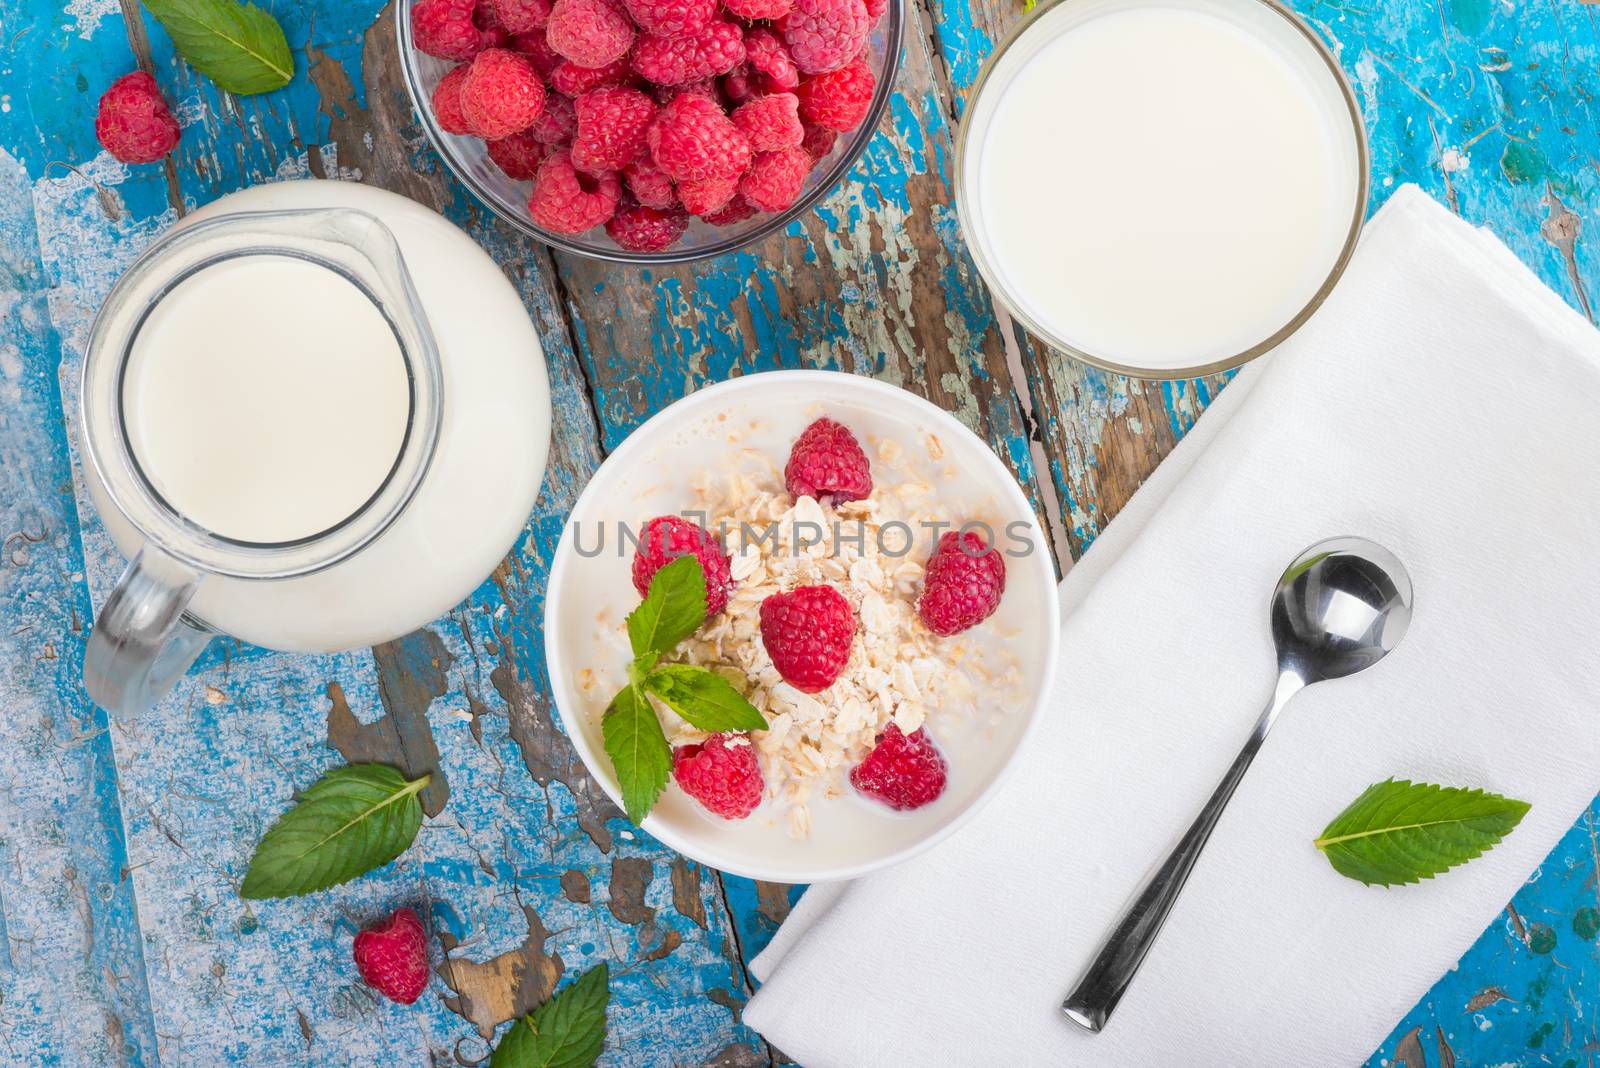 Oat flakes with milk and raspberries for breakfast Jug and glass with milk, spoon, napkin, fresh mint on an old wooden blue background, top view. The concept of a healthy diet, weight loss